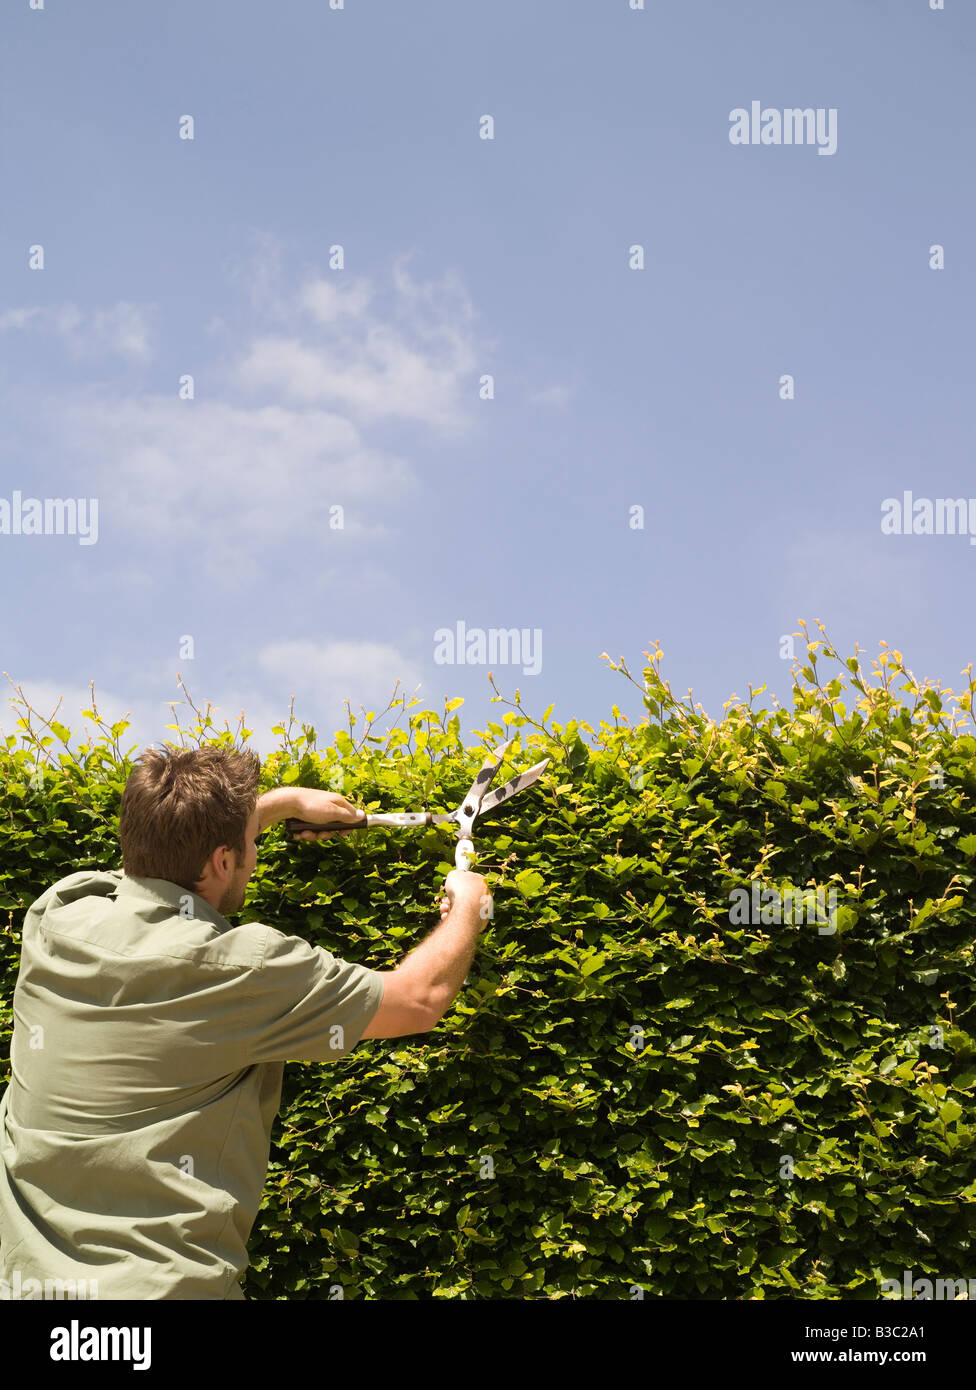 A man cutting a garden hedge with shears Stock Photo